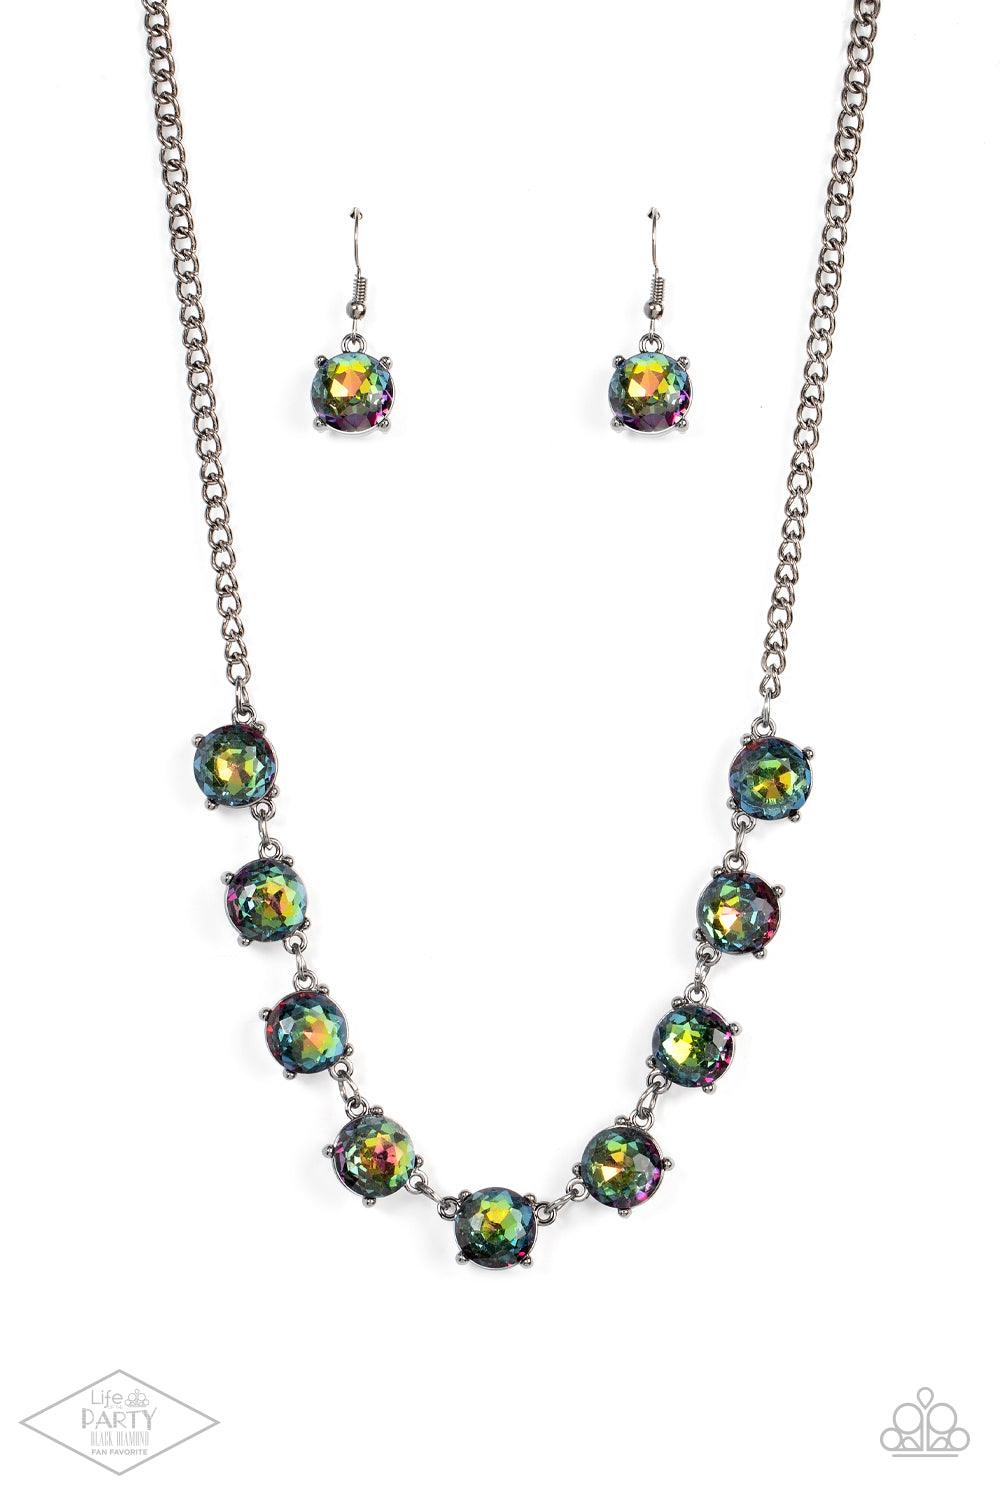 Paparazzi Accessories Iridescent Icing - Multi Featuring oil spill centers and sleek gunmetal fittings, a collection of oversized rhinestones link below the collar for an icy look. Features an adjustable clasp closure. Sold as one individual necklace. Inc